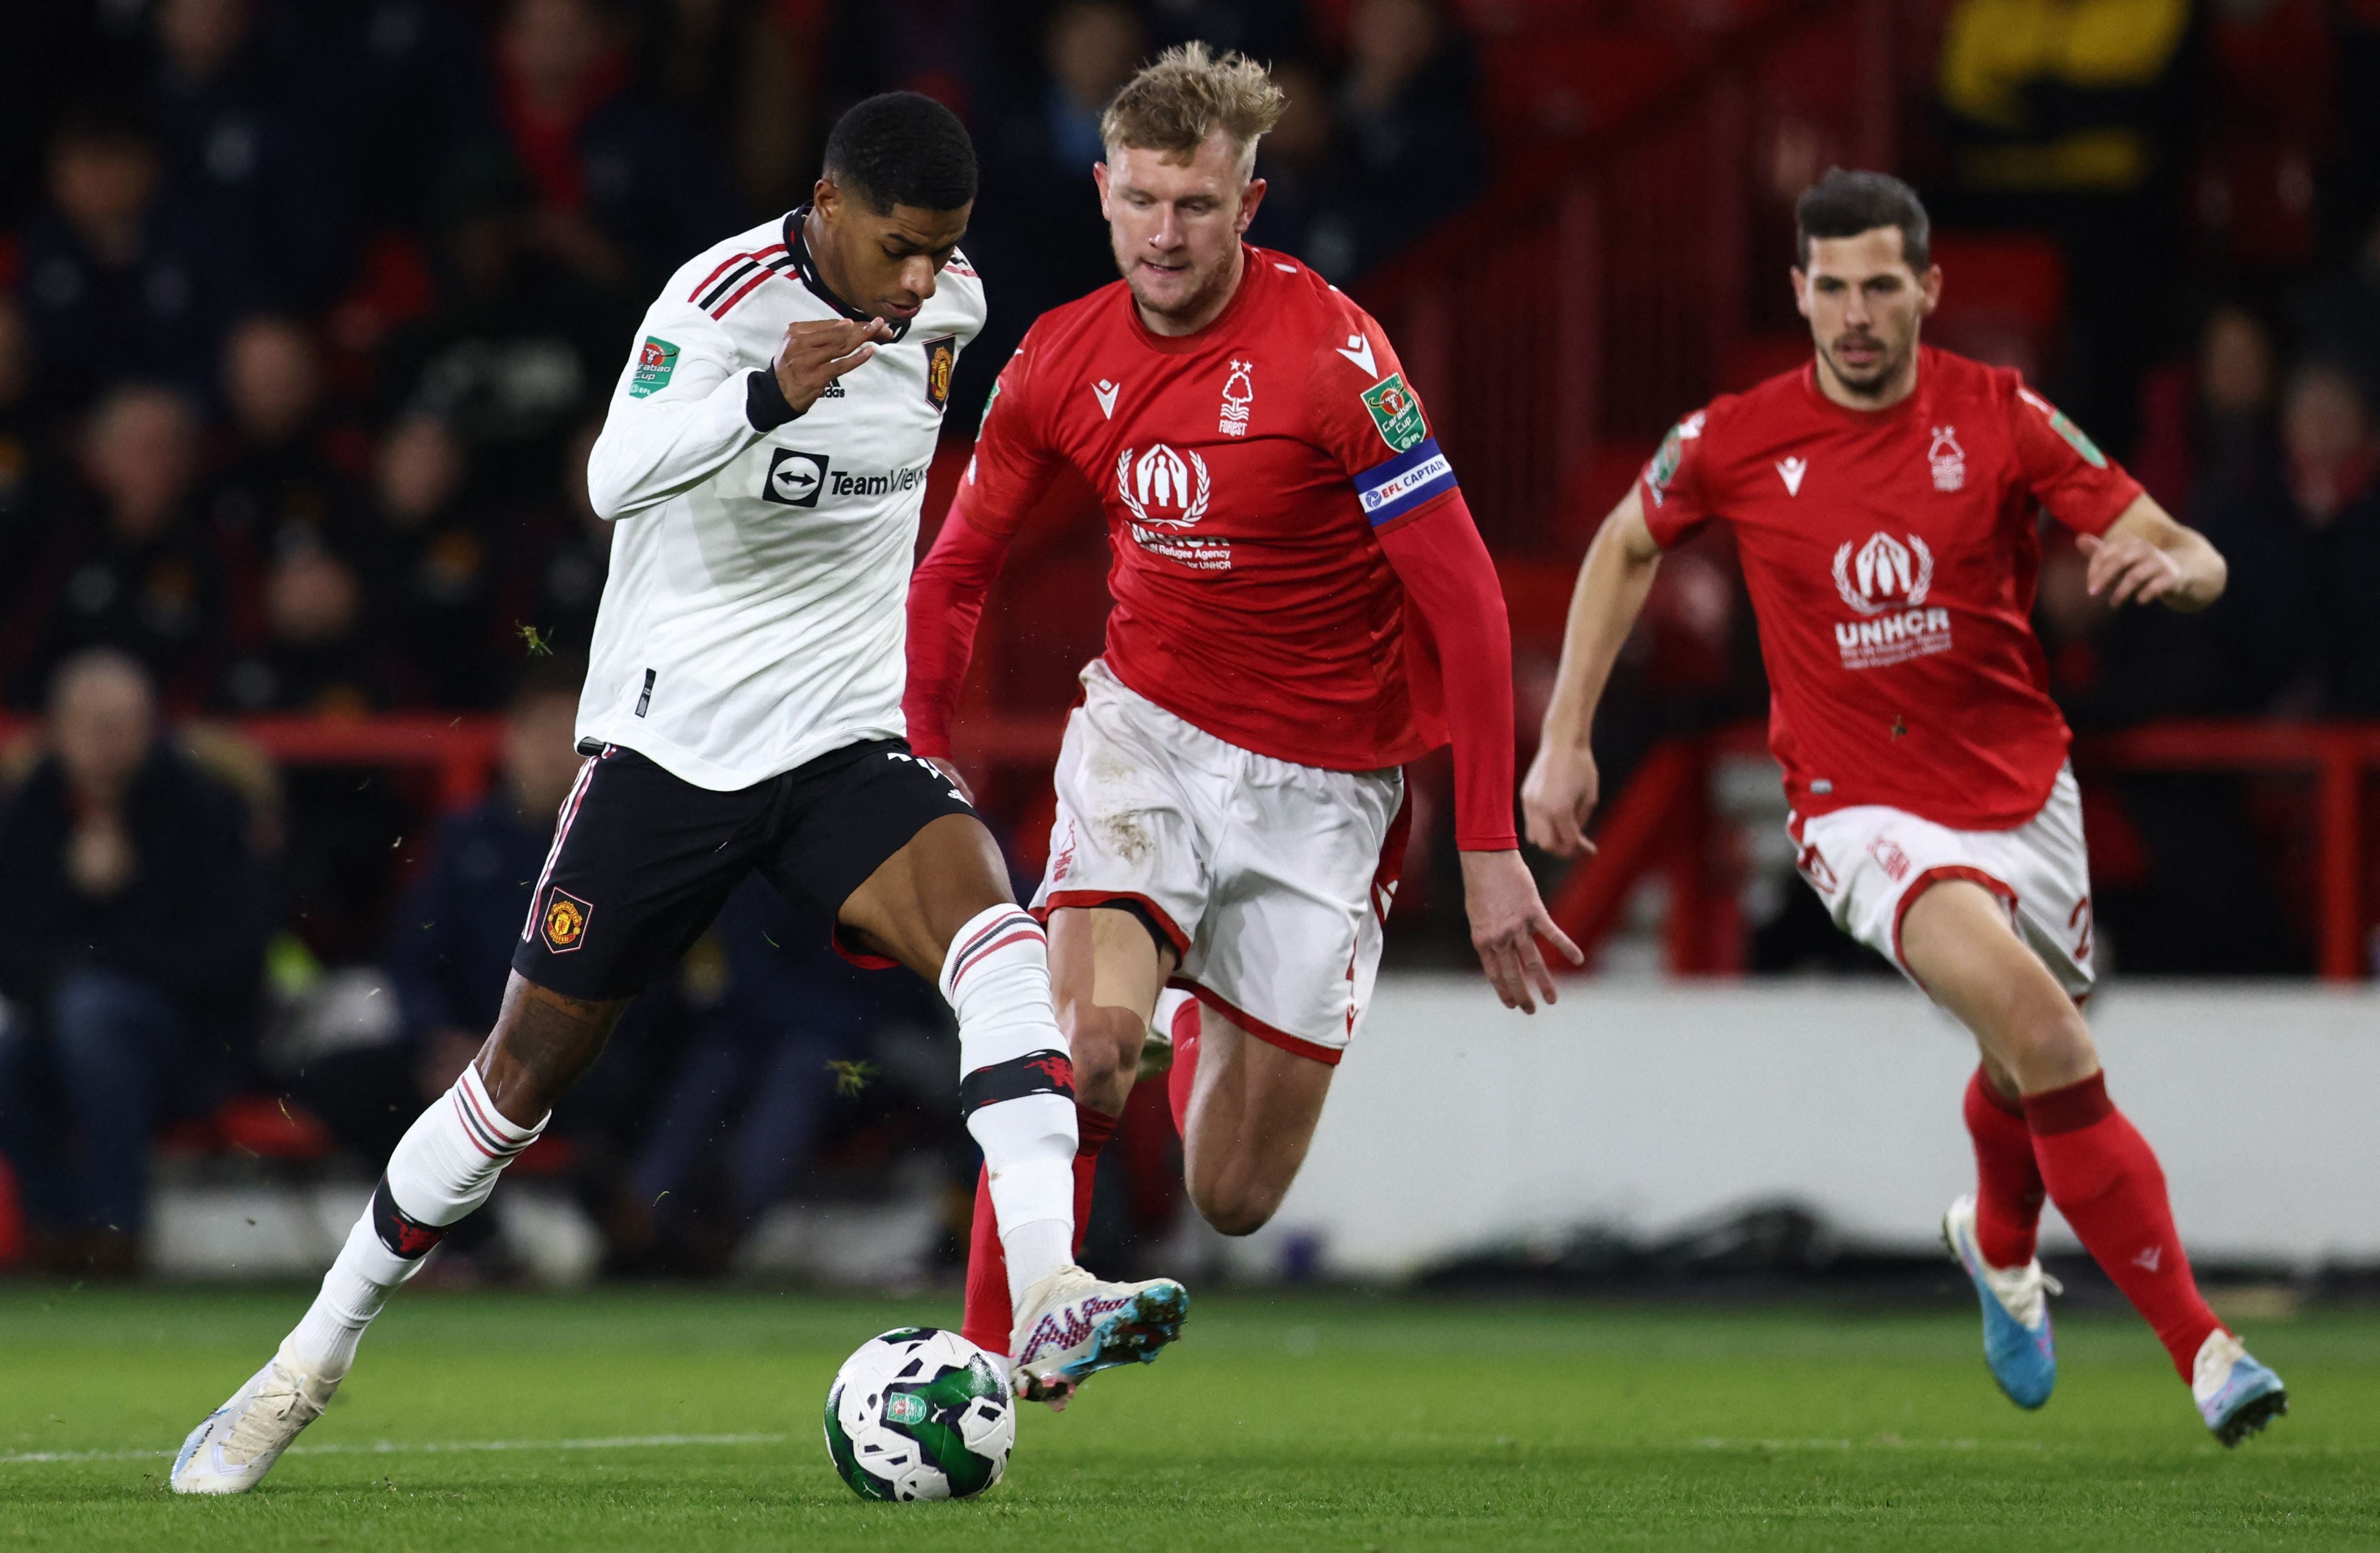 Rashford marauded through the Forest defence for his side’s opening goal